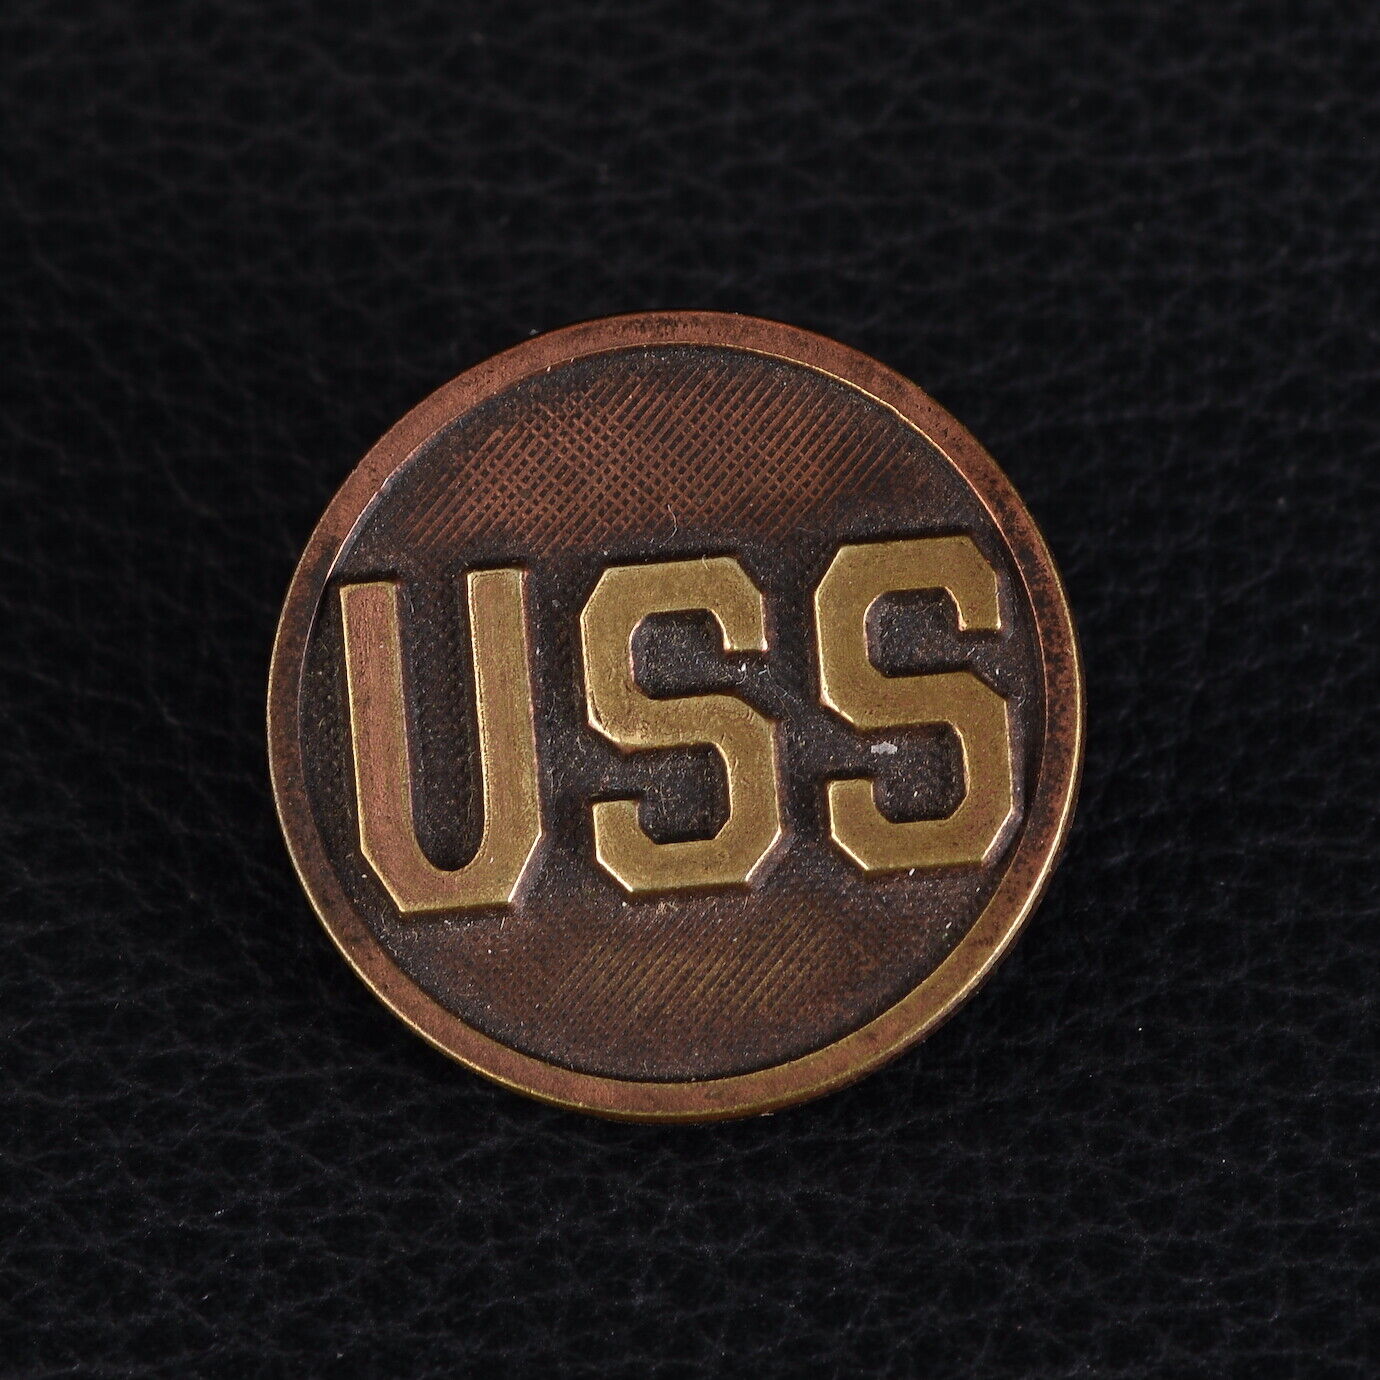 Rare Badge Col Uss United States Army Scout Pathfinder Indians Cavalry US B52